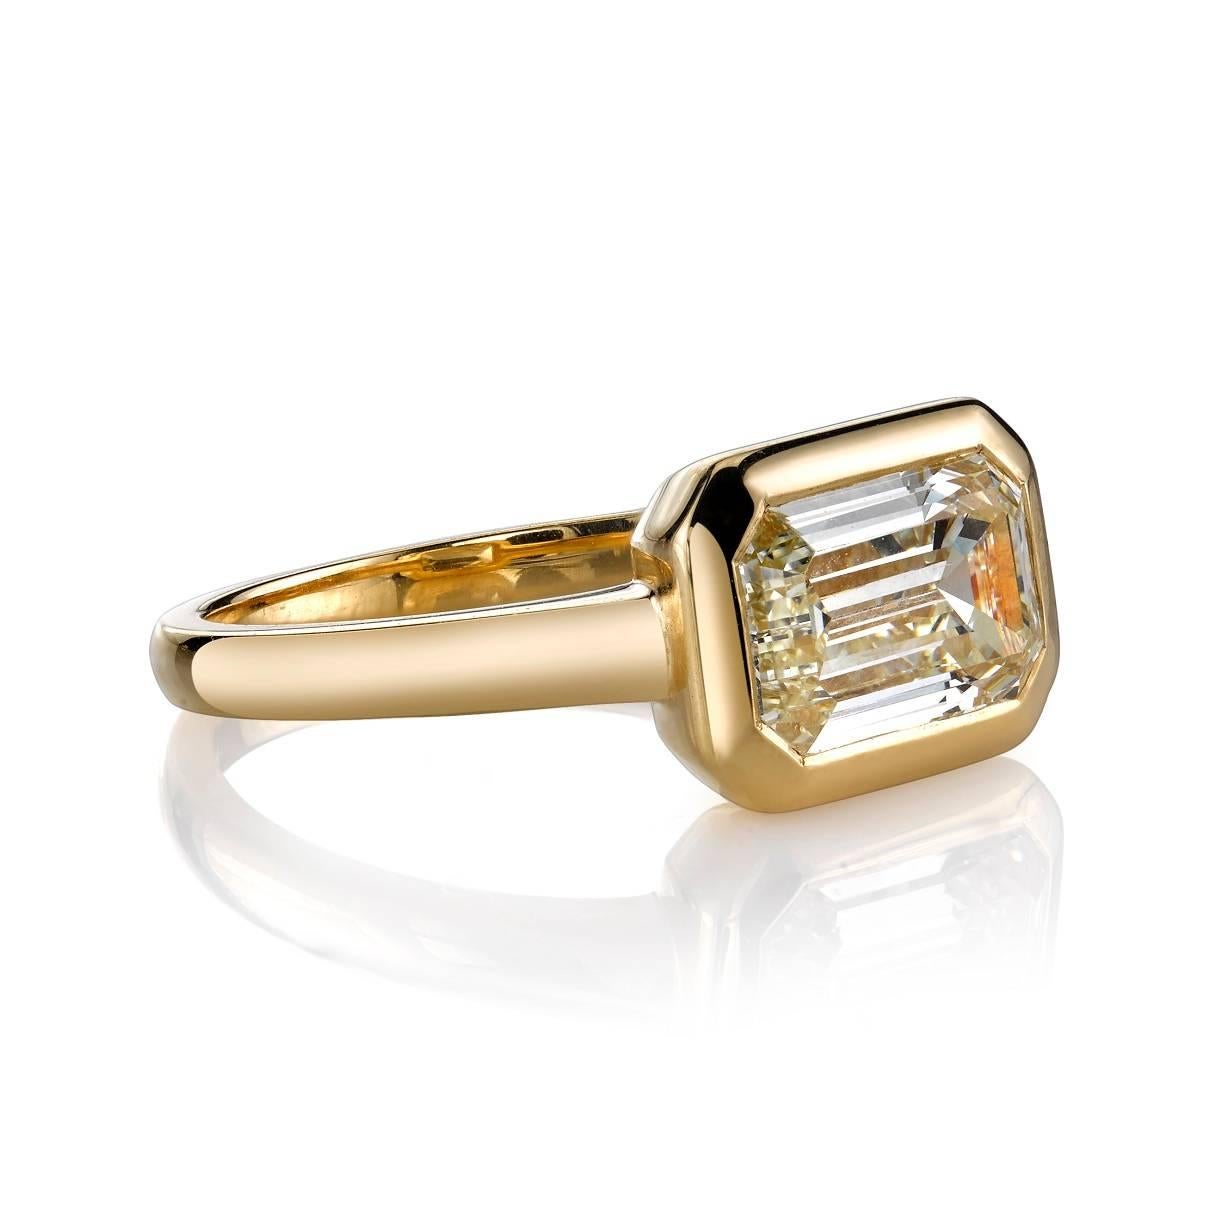 2.03ct L/VS2 EGL certified Emerald cut diamond set in a handcrafted 18k yellow gold setting. Bold yet classic, this beauty is a unique take on a solitaire design.